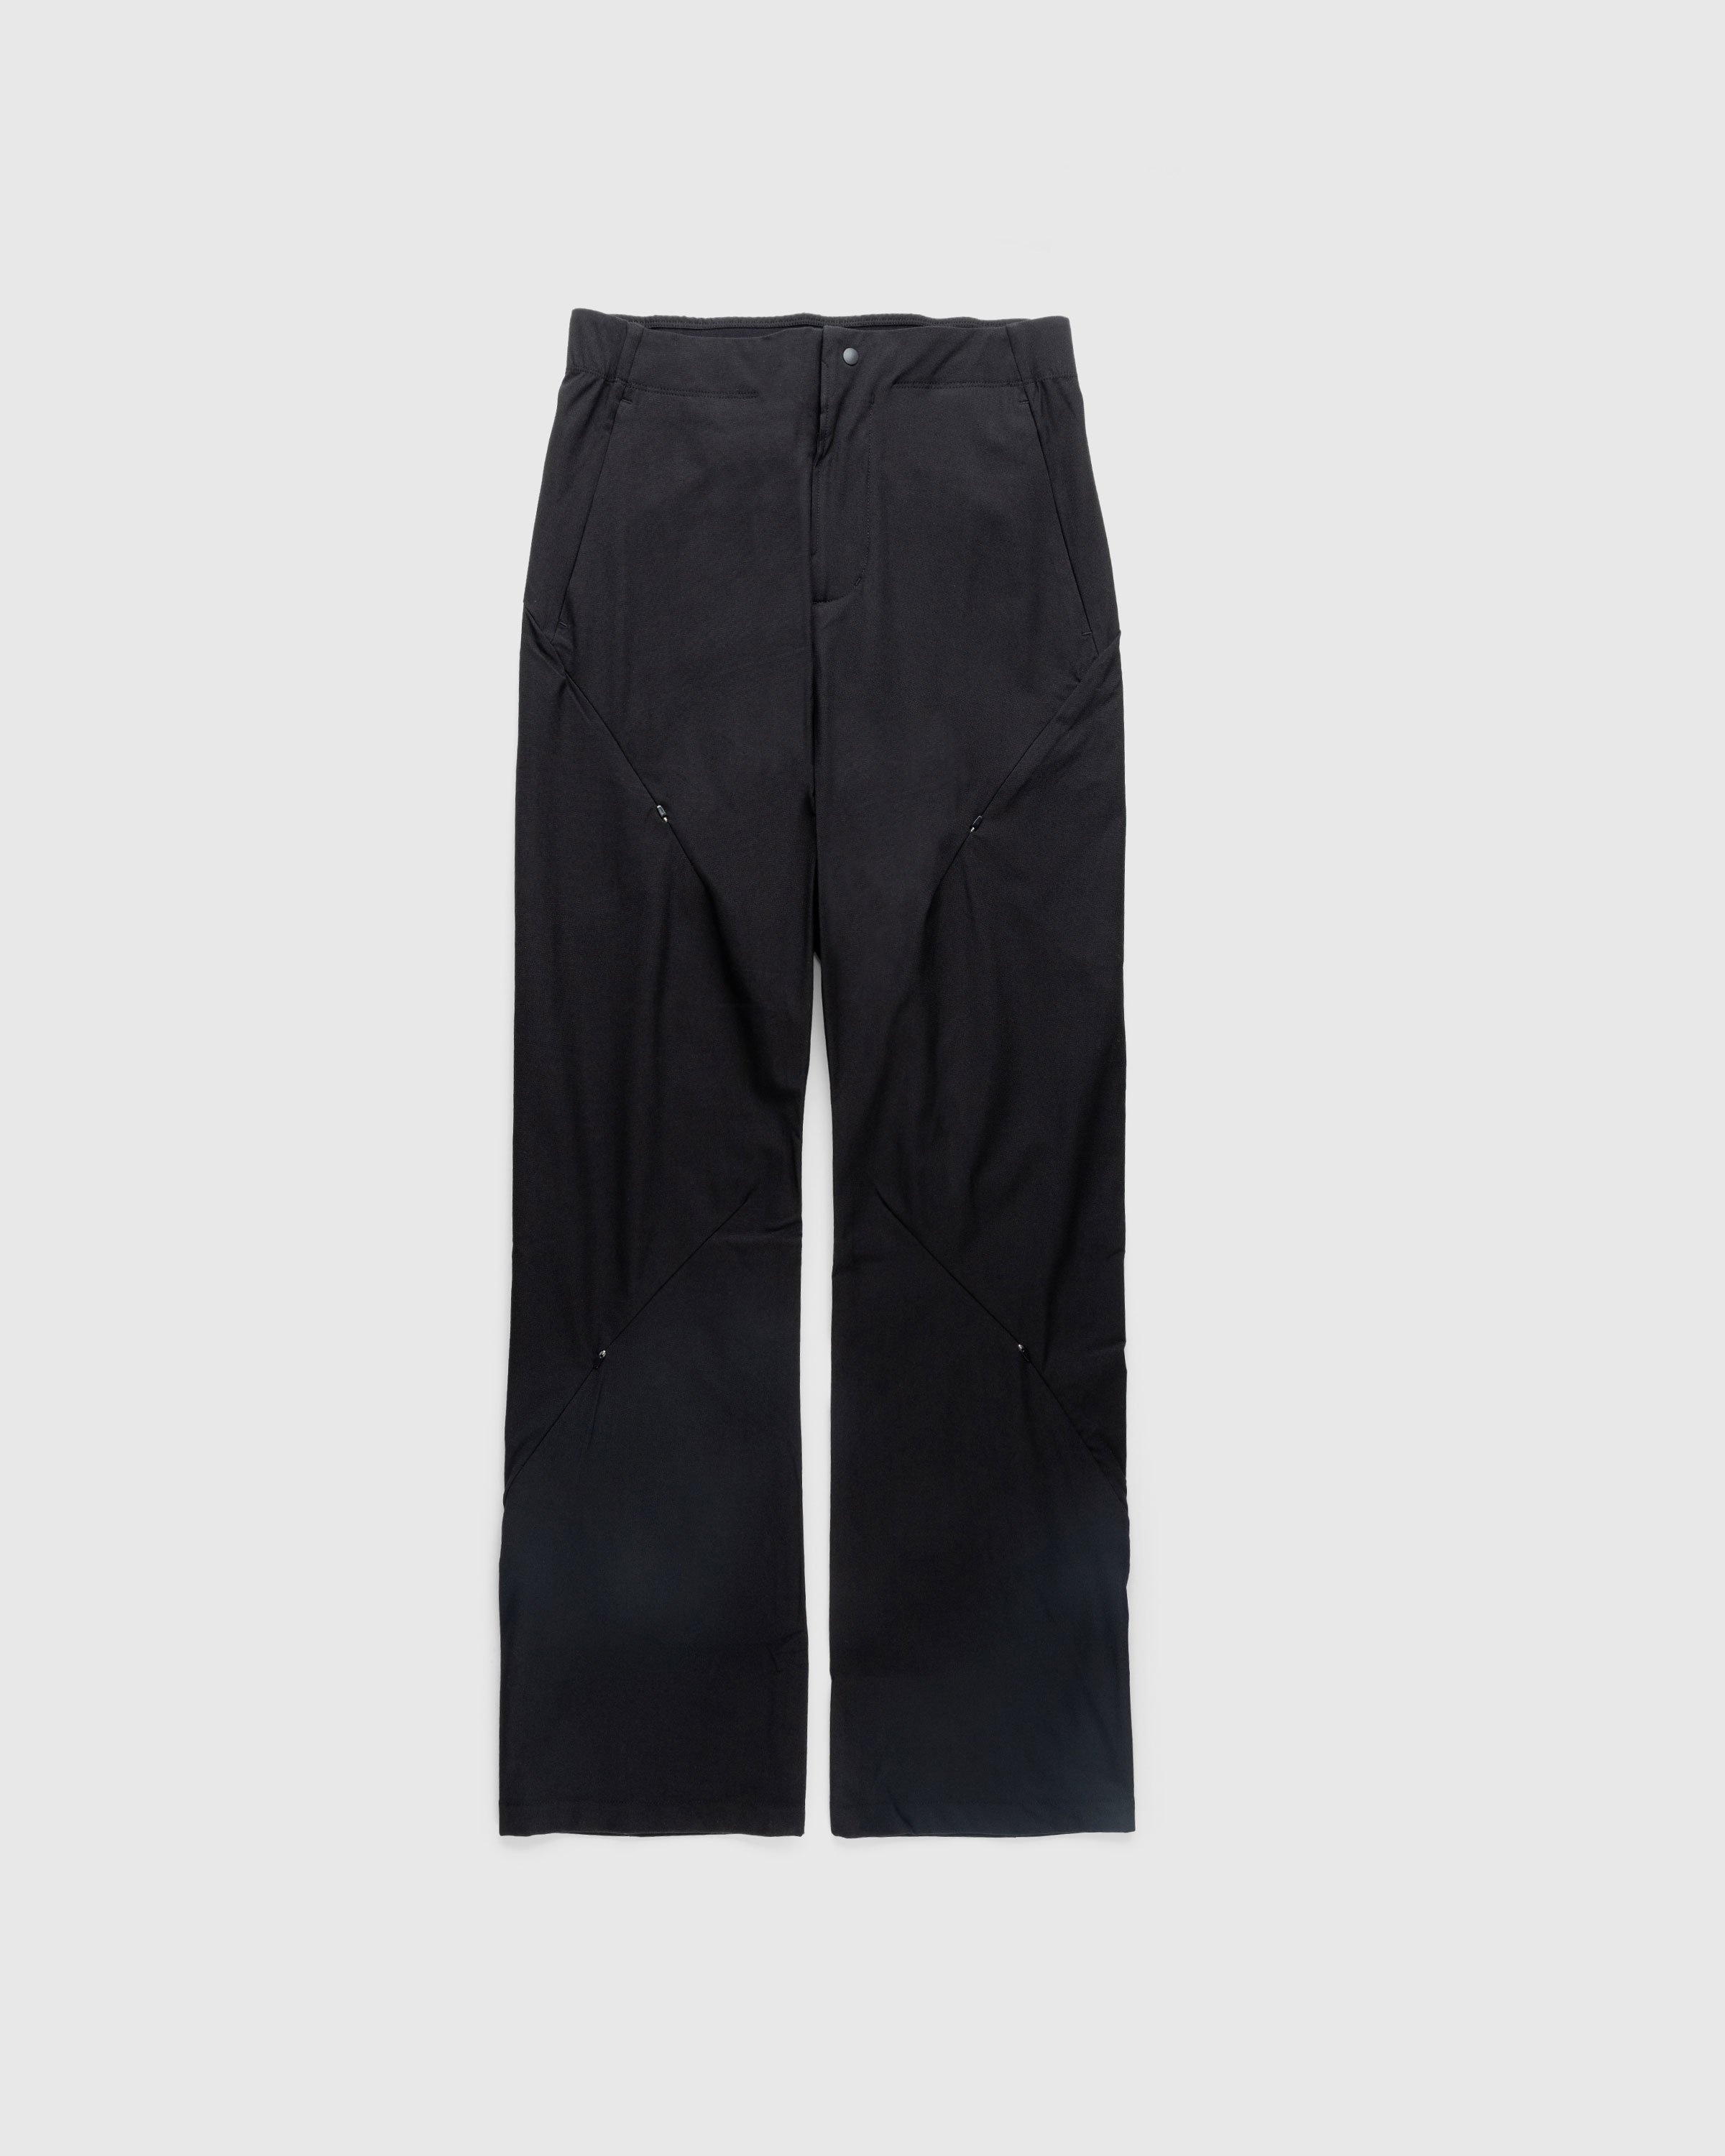 Post Archive Faction (PAF) – 5.1 Technical Pants Right Black